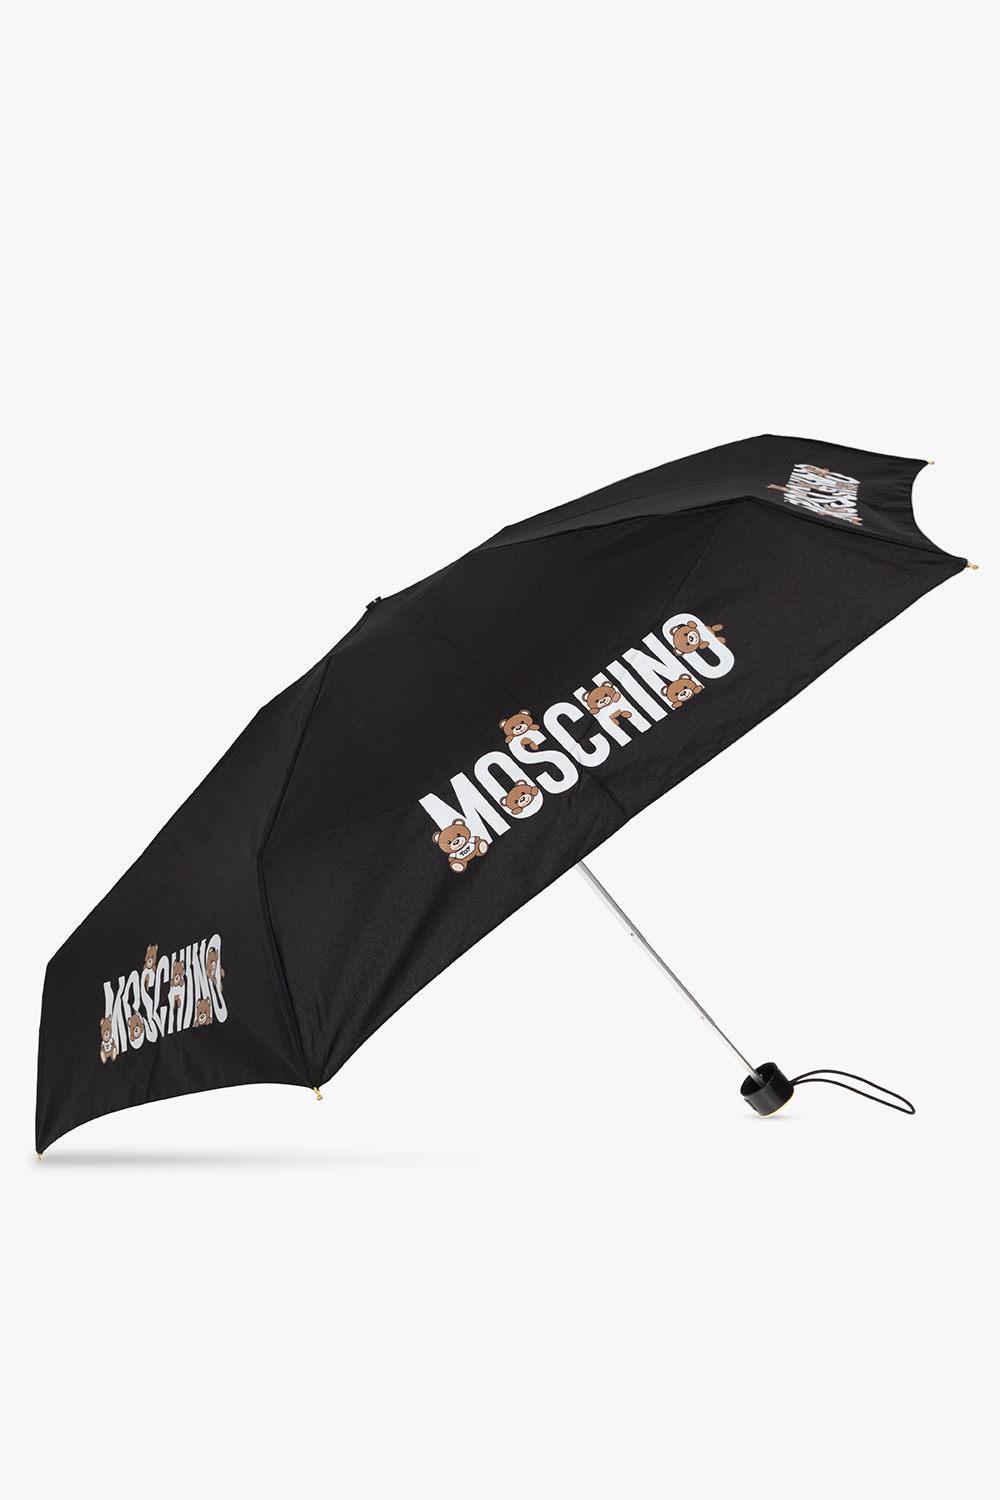 Moschino IN HONOUR OF MOVEMENT AND BREAKING PATTERNS